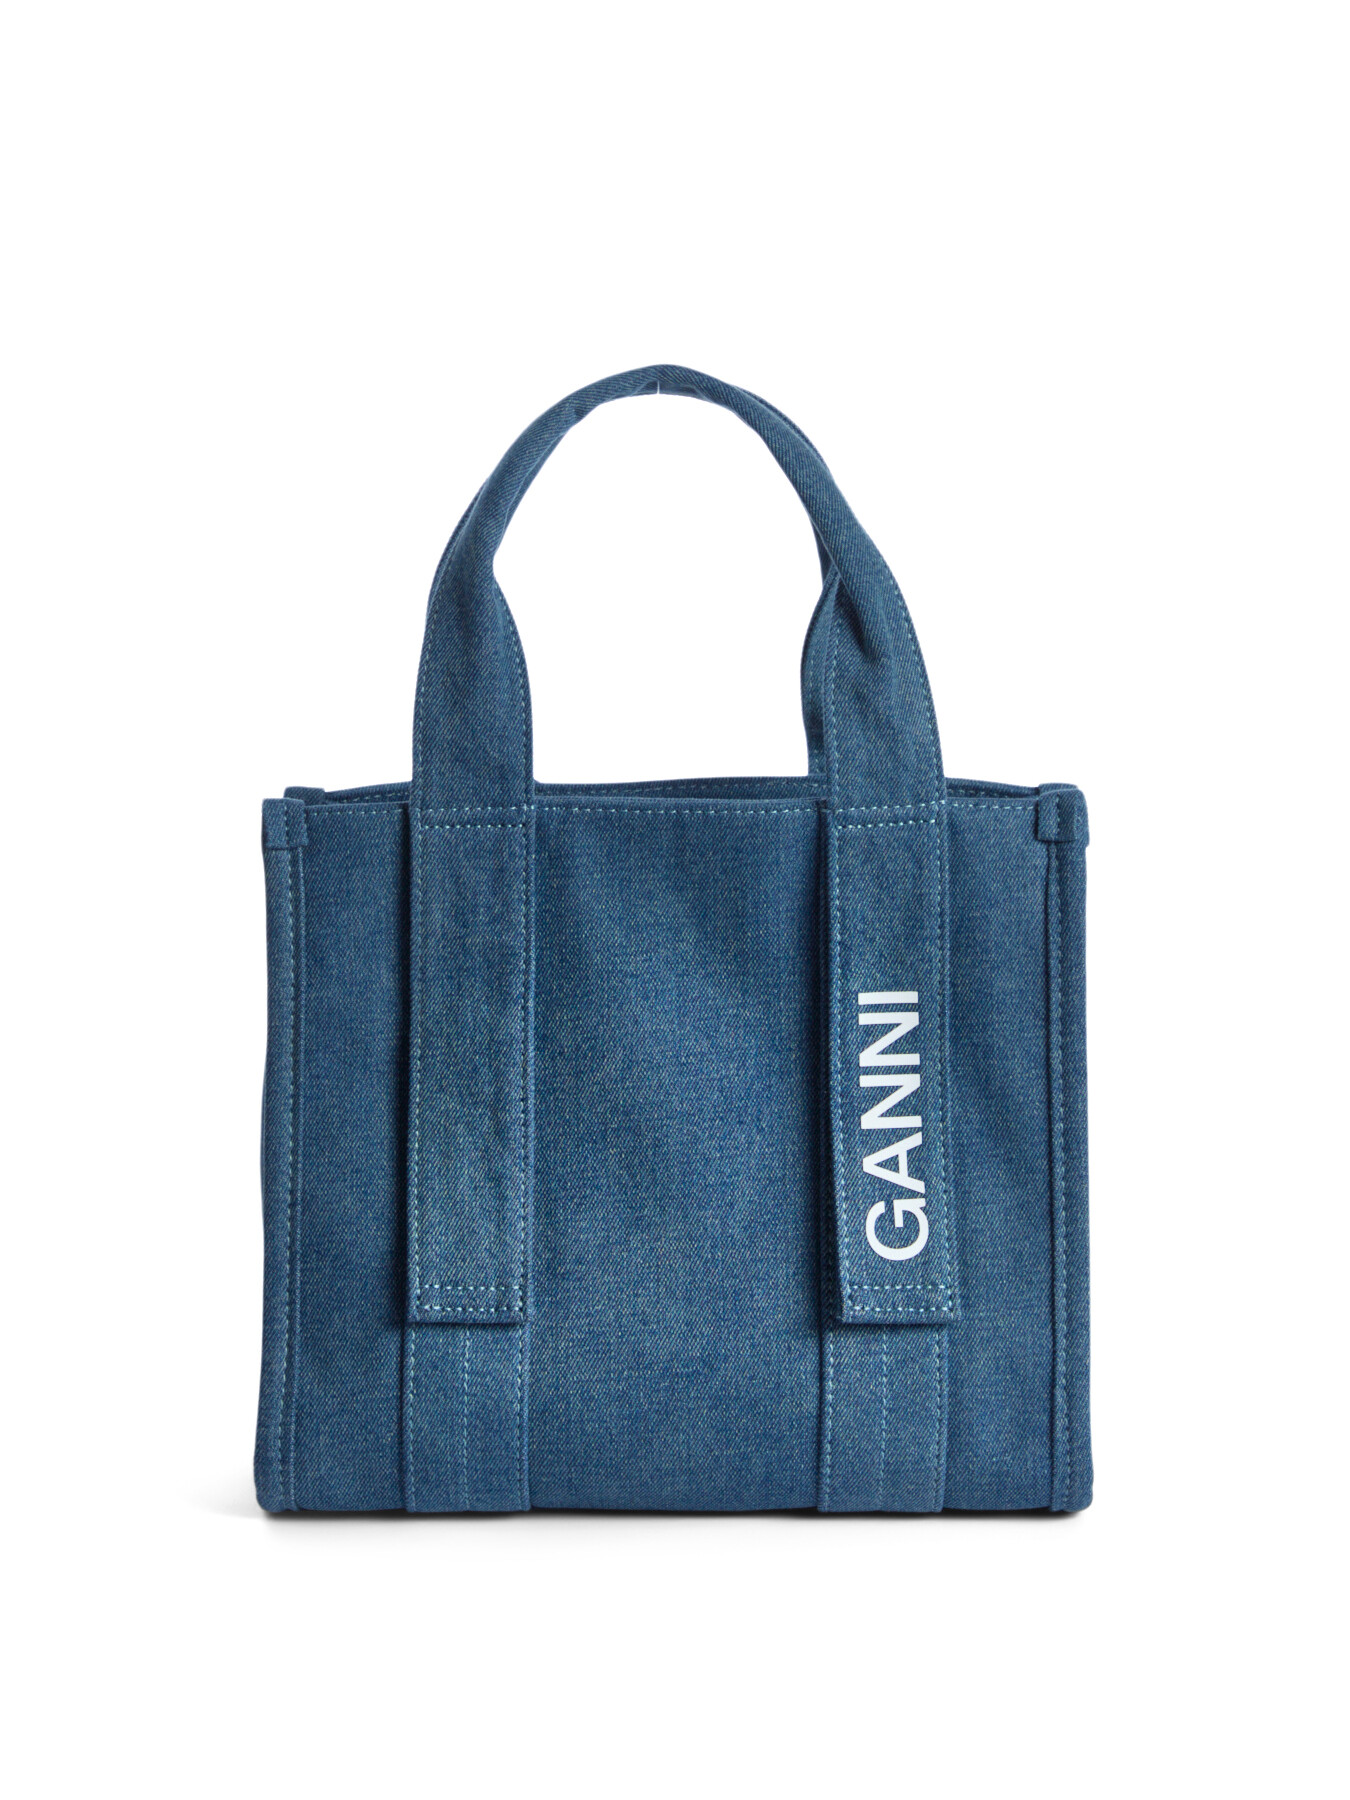 Ganni Women's Small Recycled Tech Tote Blue